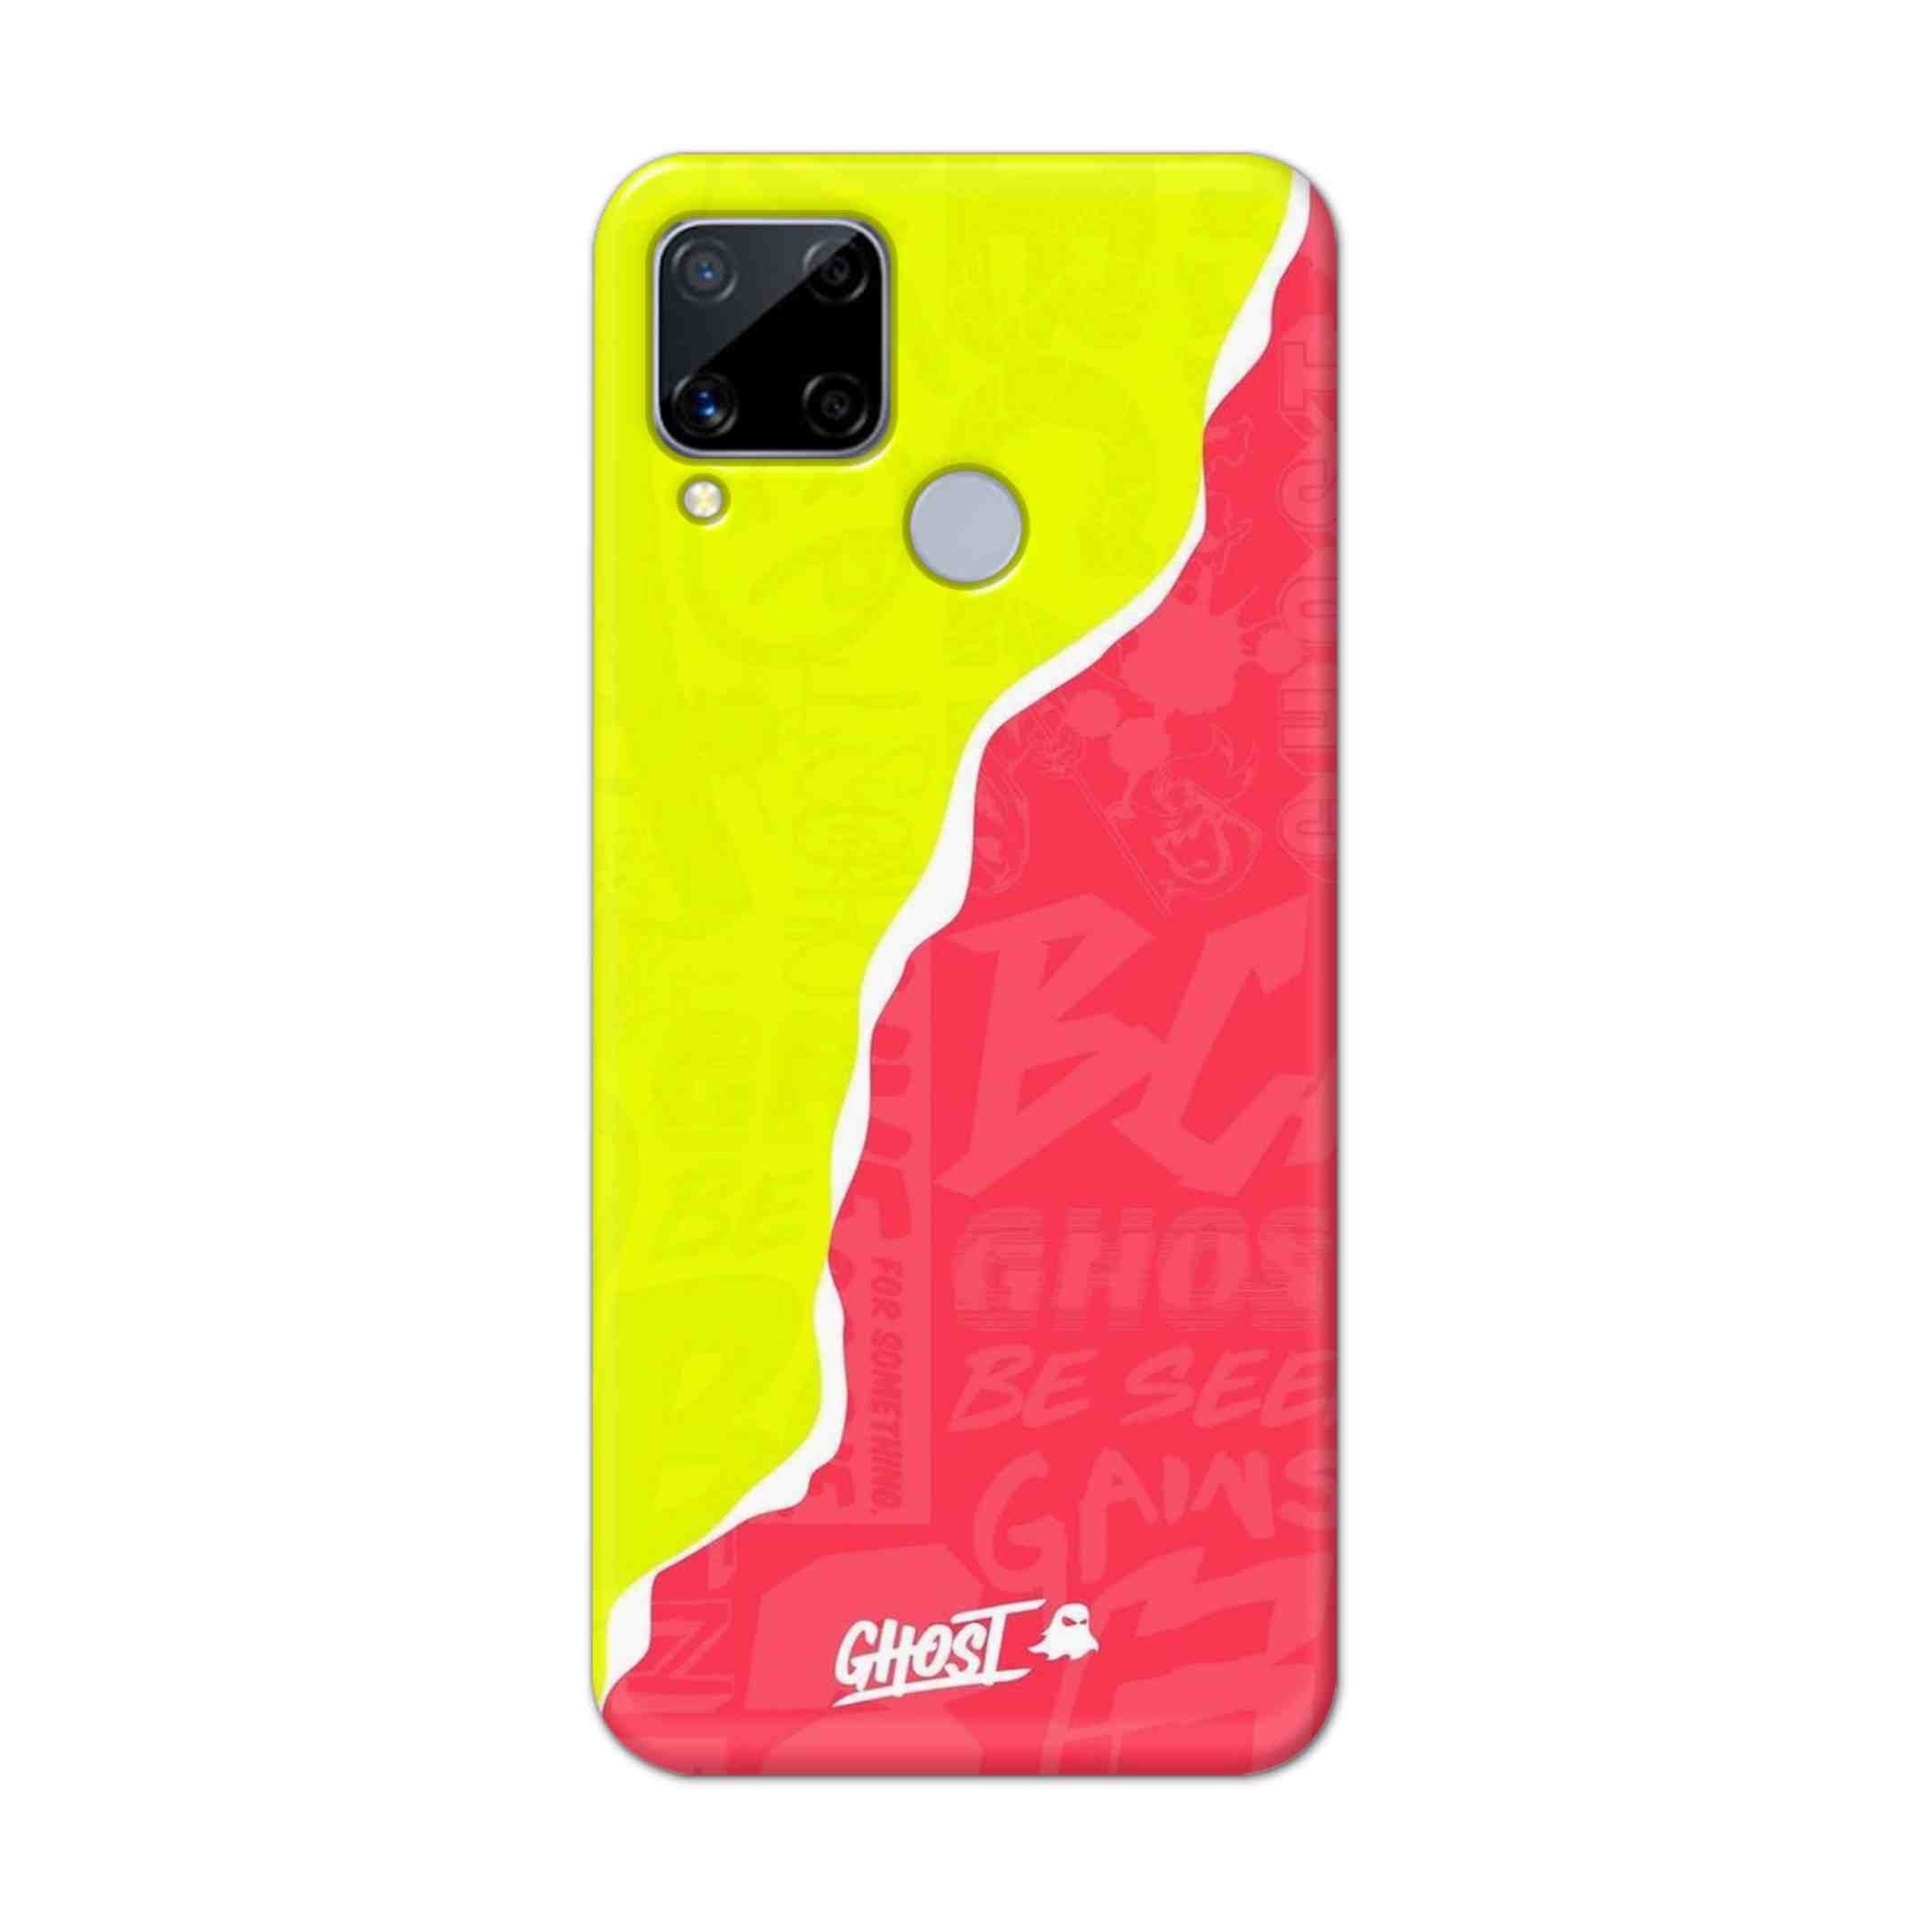 Buy Ghost Hard Back Mobile Phone Case Cover For Realme C15 Online